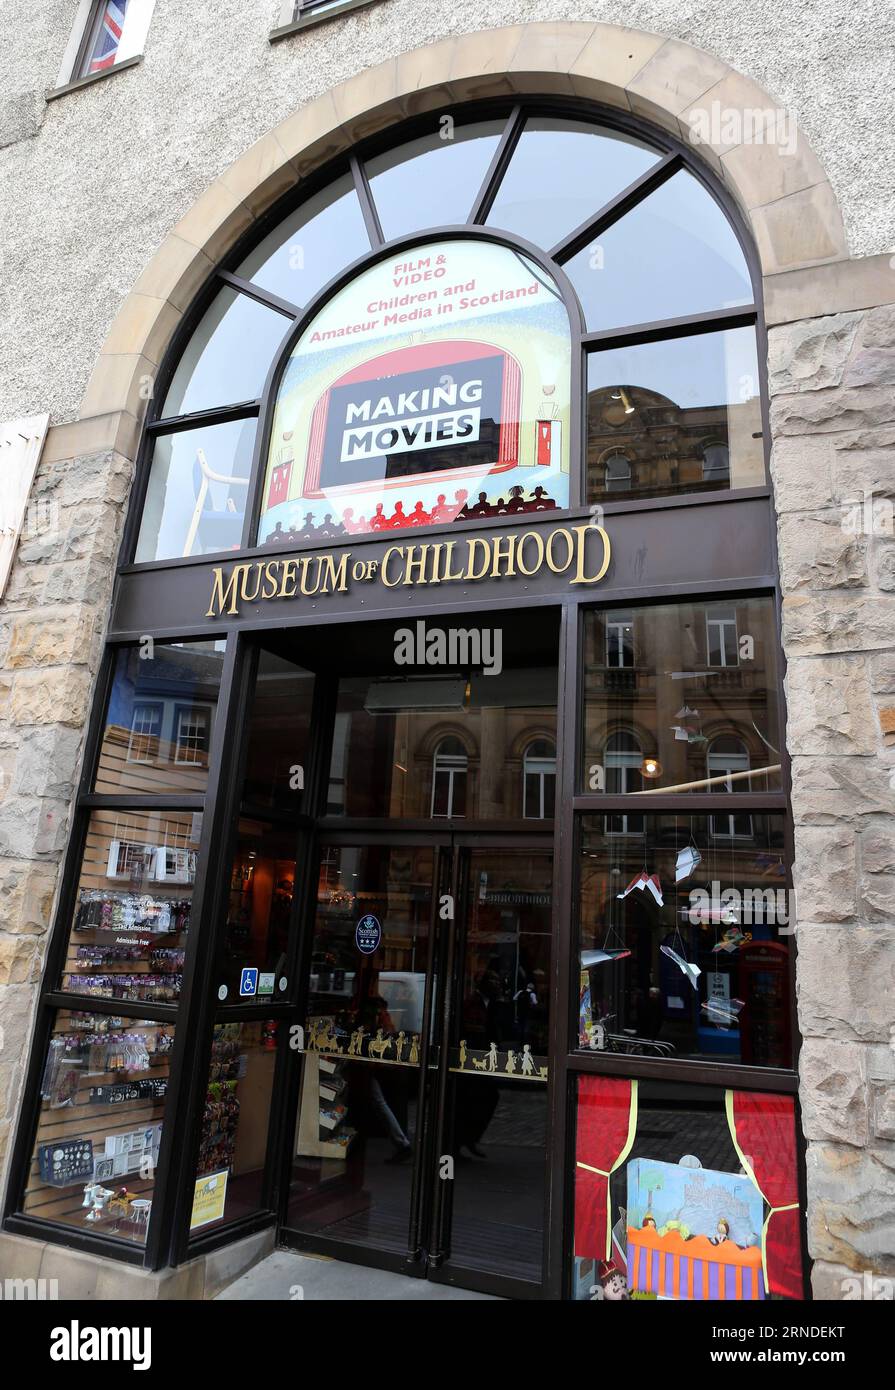 (160518) -- LONDON, May 18, 2016 -- File Photo taken on Sept. 17, 2014 shows the Museum of Childhood in Edinburgh, Britain. International Museum Day is celebrated every year on or around May 18 under the coordination of the International Council of Museums (ICOM). ) (zhf) BRITAIN-MUSEUMS-INTERNATIONAL MUSEUM DAY HanxYan PUBLICATIONxNOTxINxCHN Stock Photo